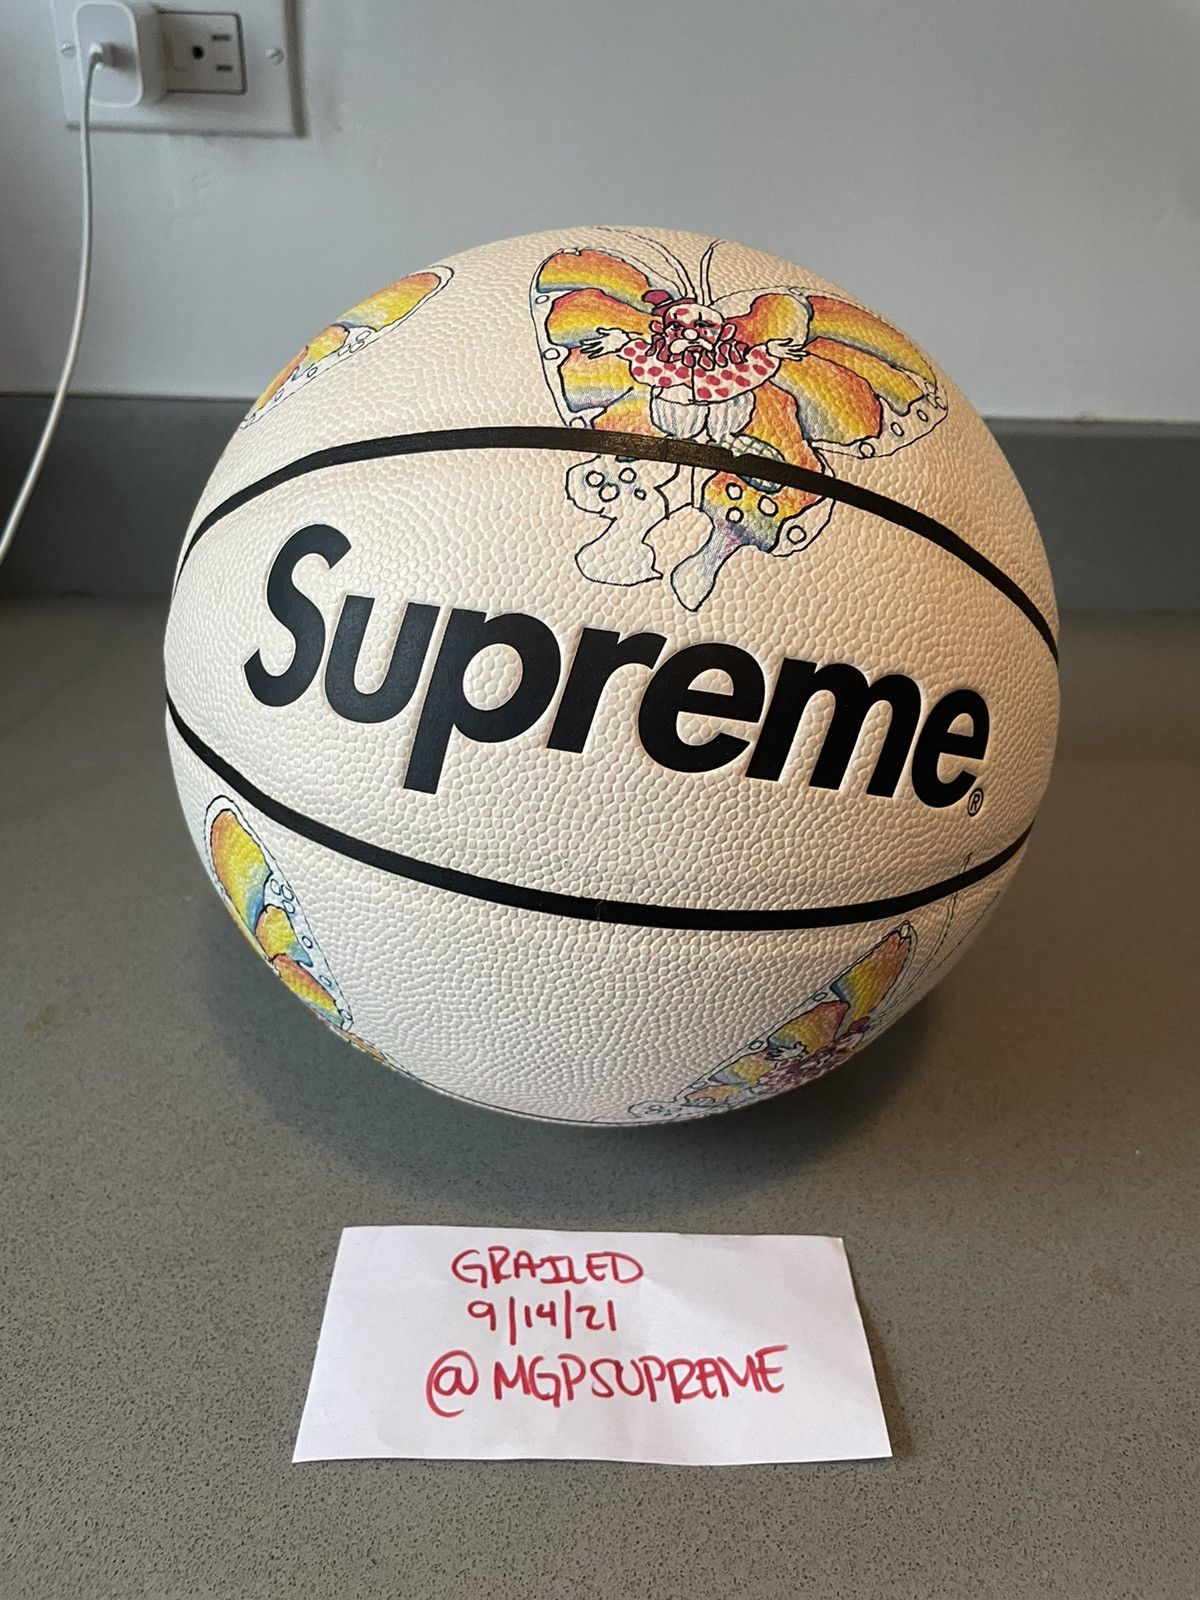 Supreme Gonz Butterfly Spalding Basketball | Grailed